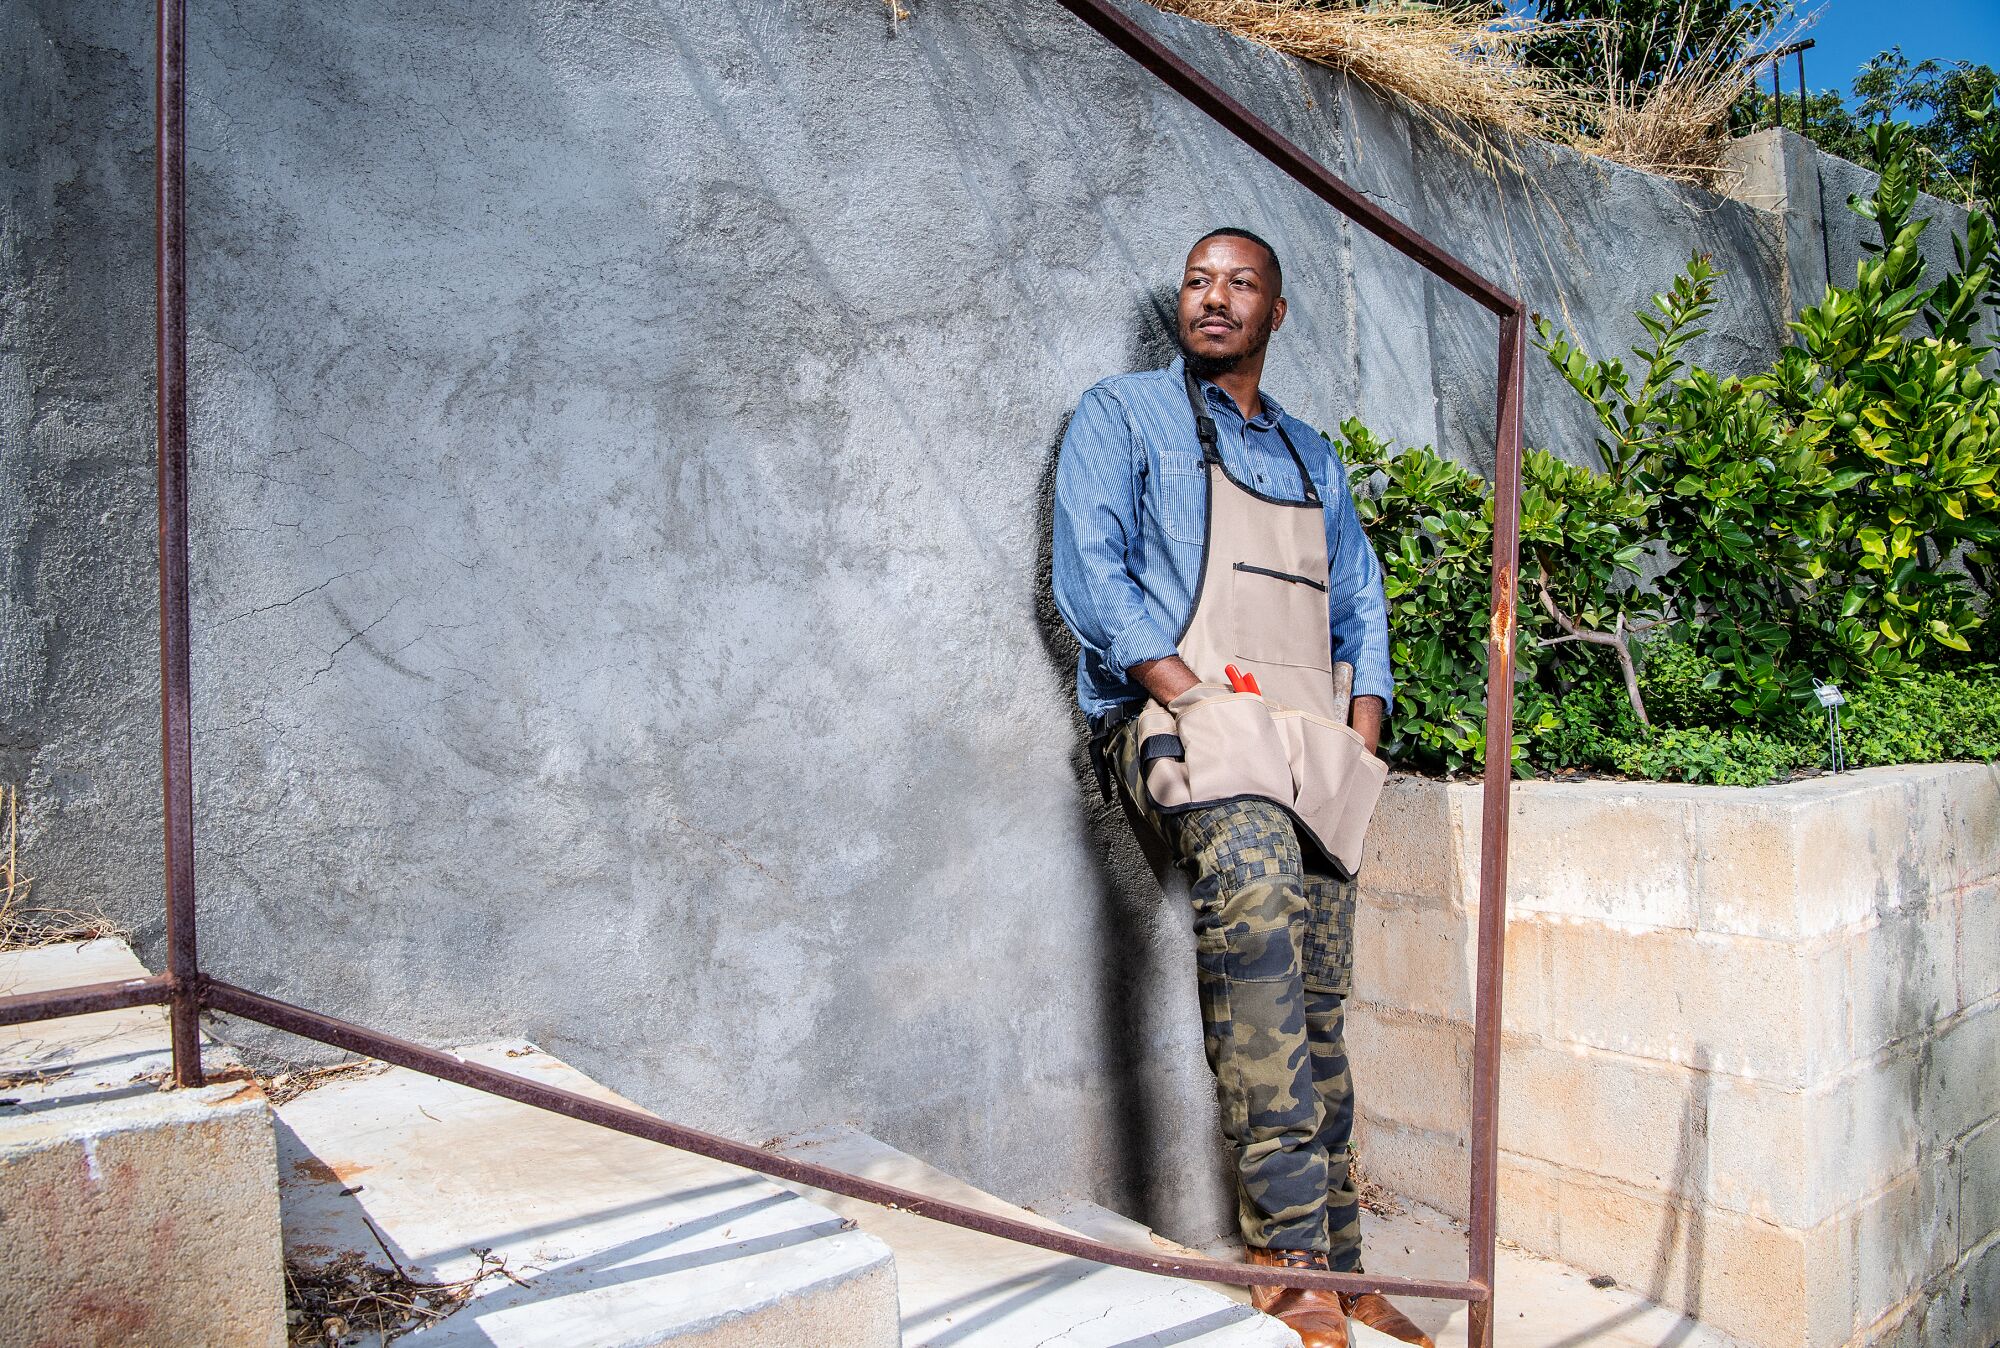 A man wearing camouflage pants and a handyman apron leans against a concrete wall in his garden.